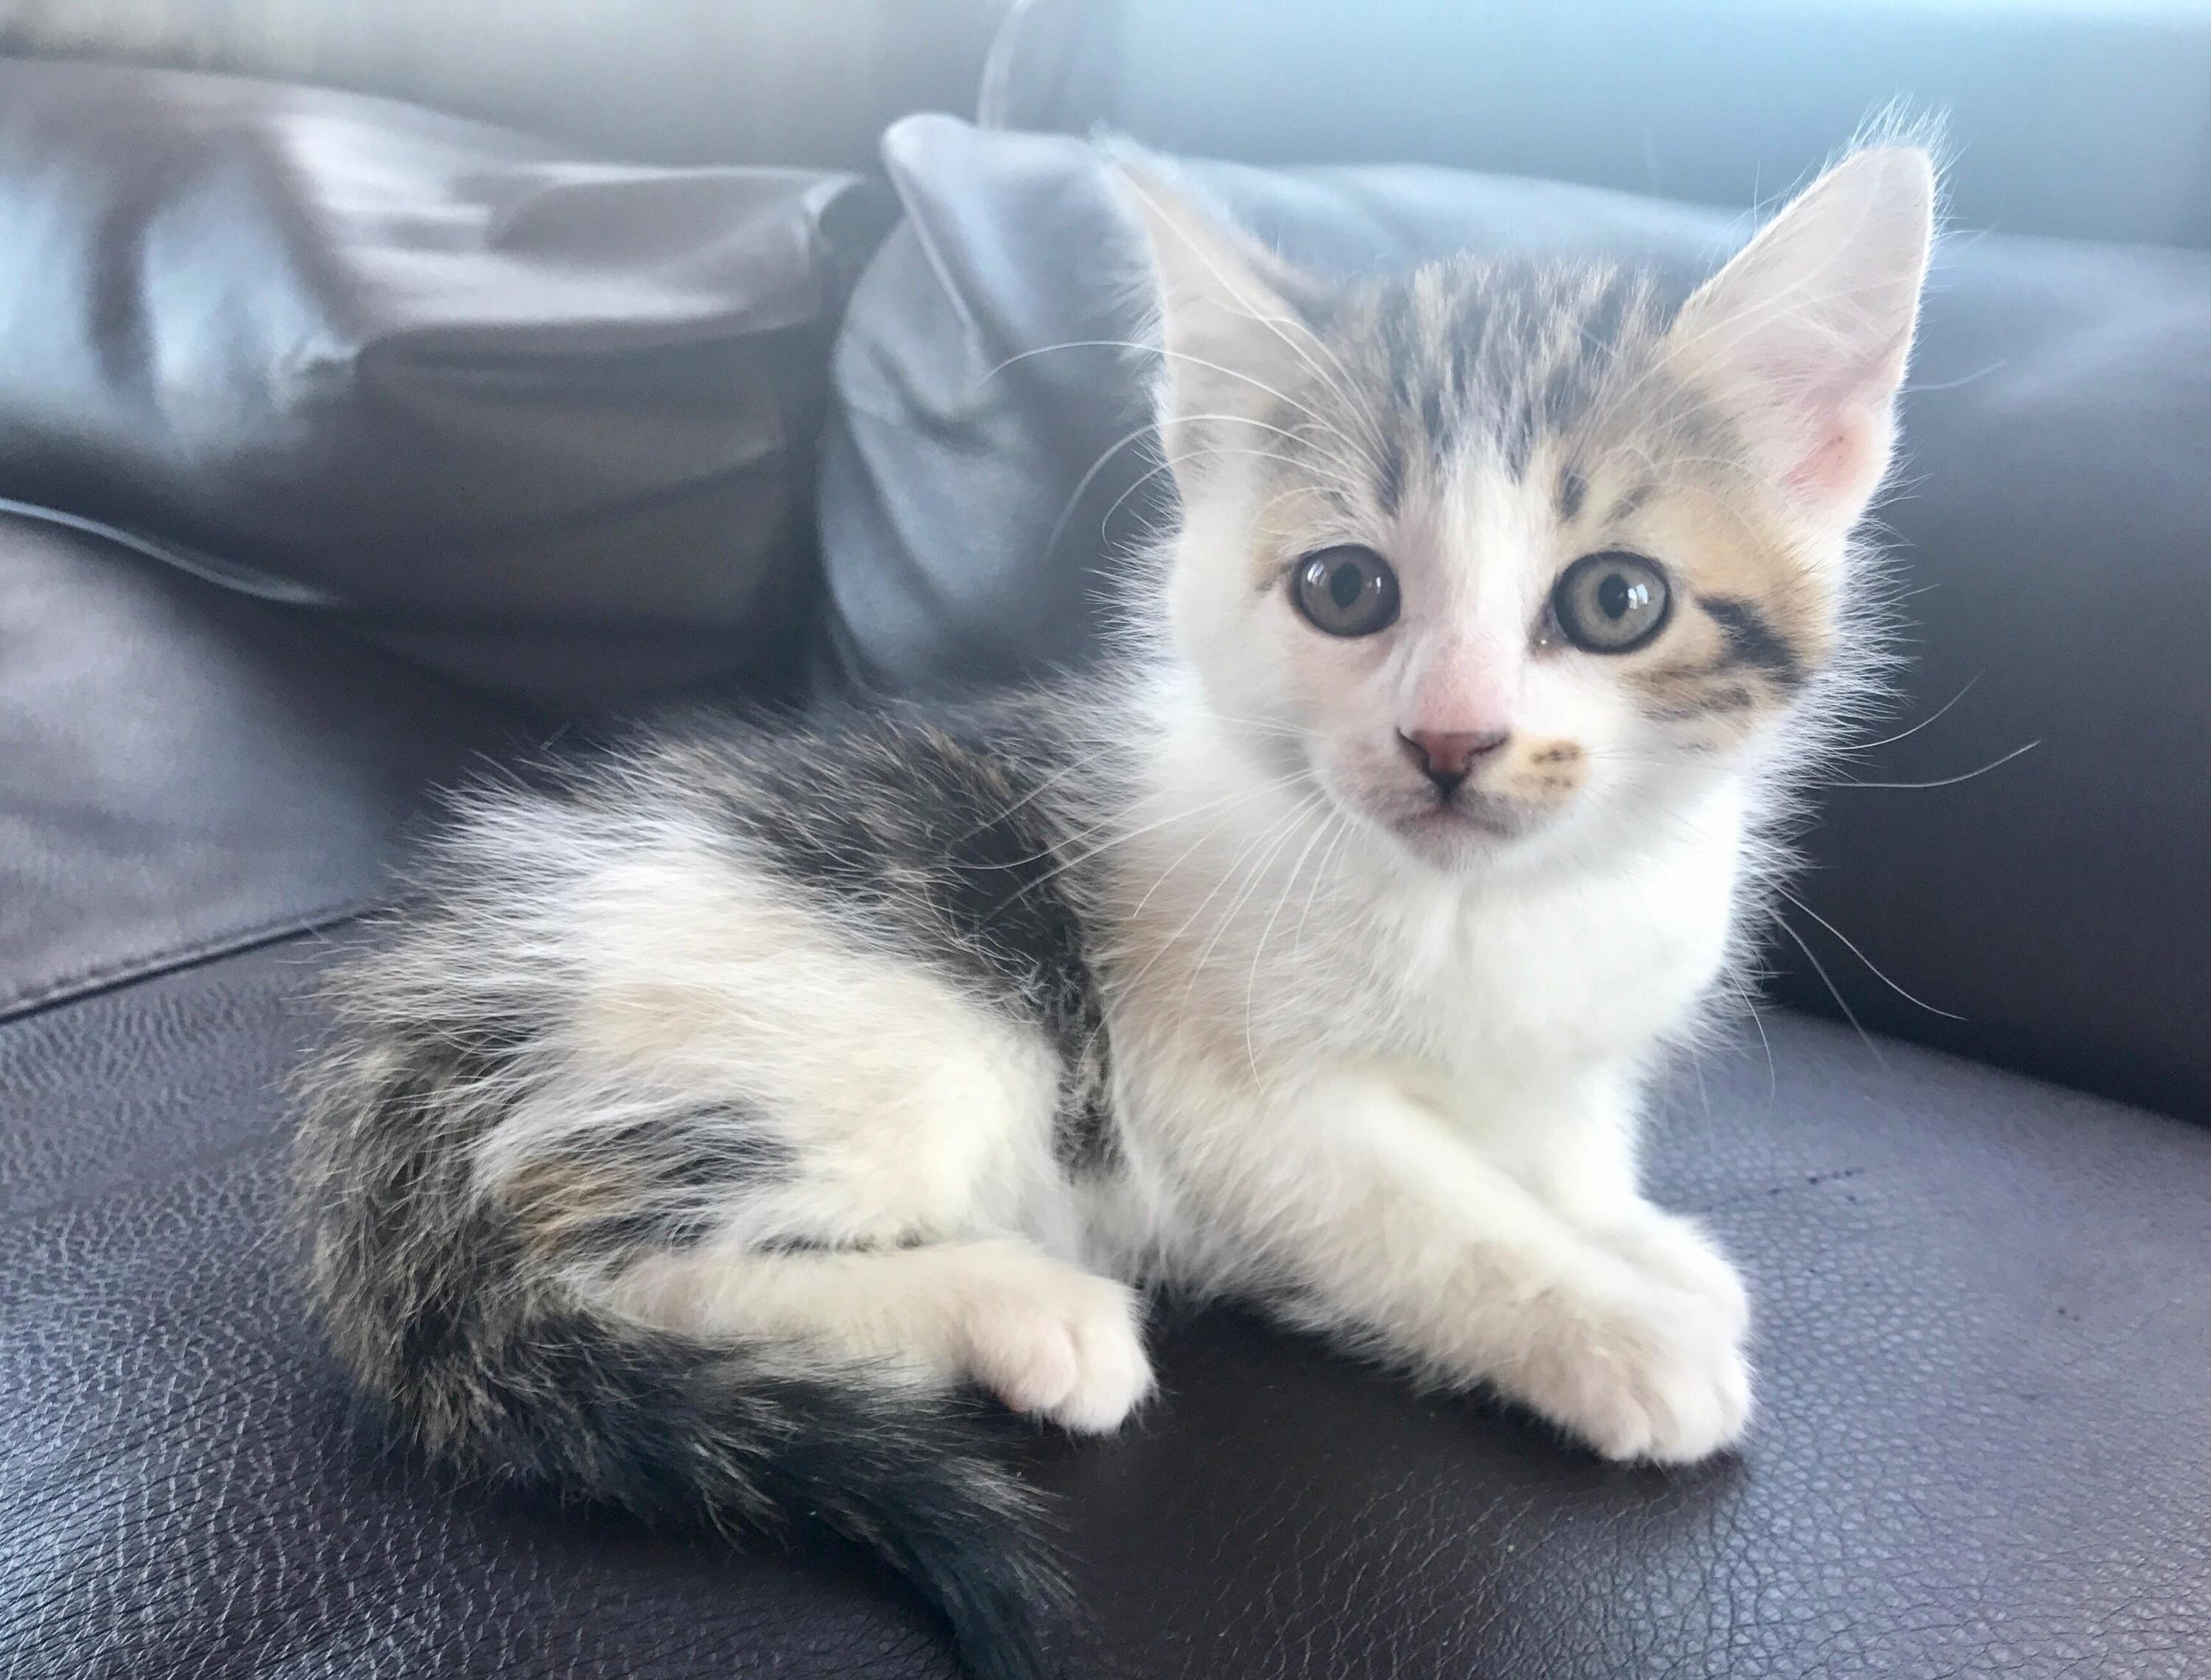 Is My Kitten Medium Hair Or Short Hair%EF%80%A5 Person That Sold It To Me Said It Was Probably Short Haired But That It Has A Chance Of Being Medium Haired. Thanks 